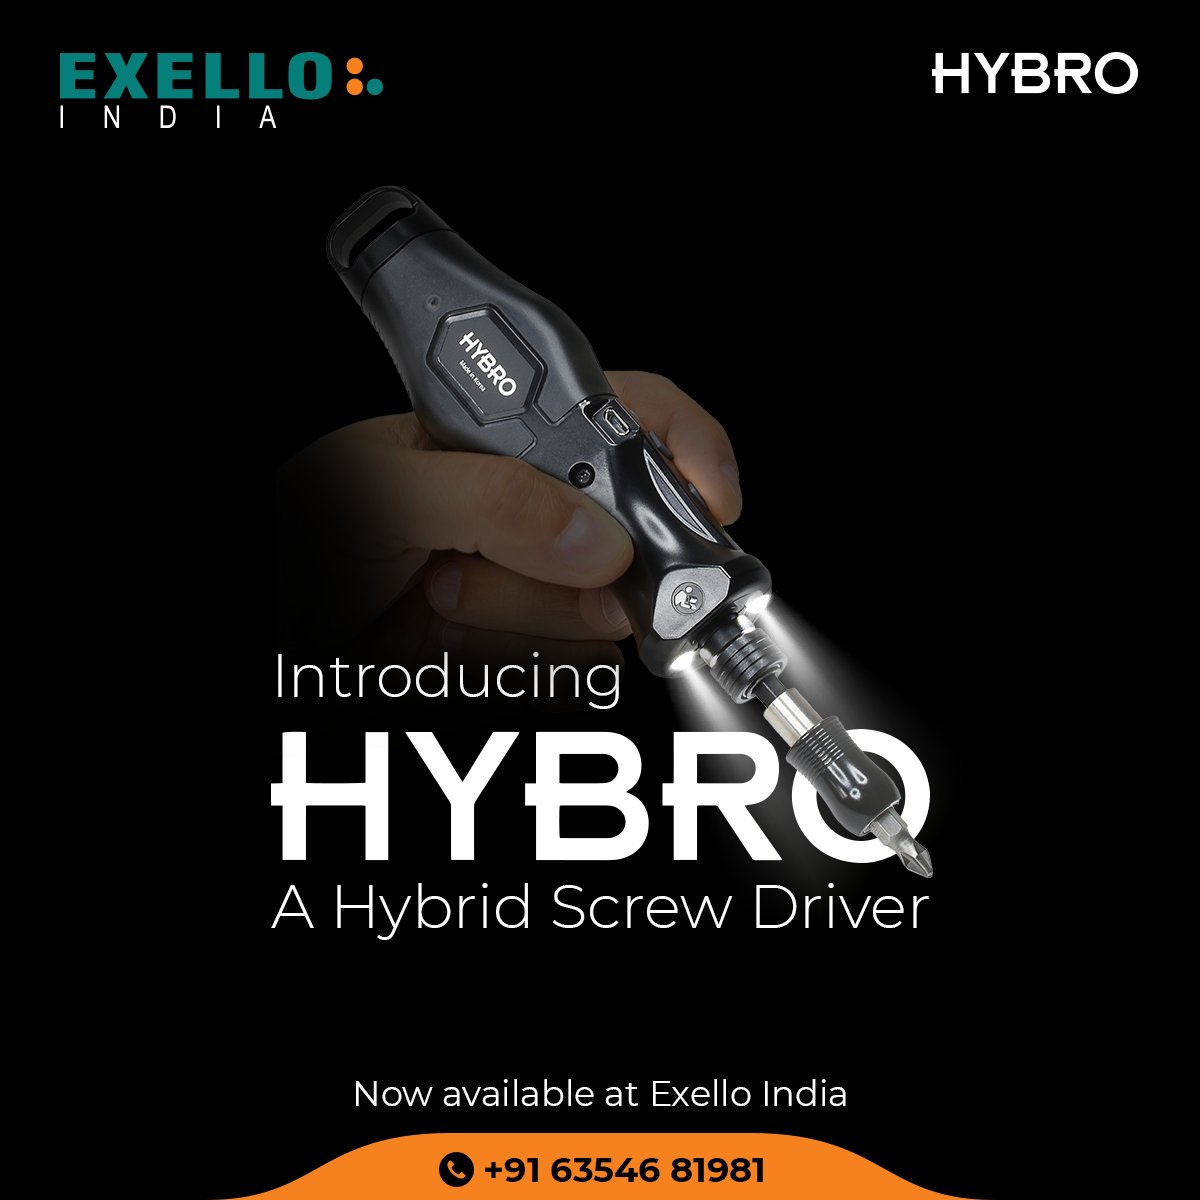 HYBRO – Hybrid screw driver; a real game changer for your hand tool experiences is! Call Exello India for a demo at: +91 6354681981
.
.
.
#HYBRO #electricscrewdriver #ExelloIndia #hybridscredriver #electrical #handtools #industrialtools #highqualitytools #torqueScrewdriver